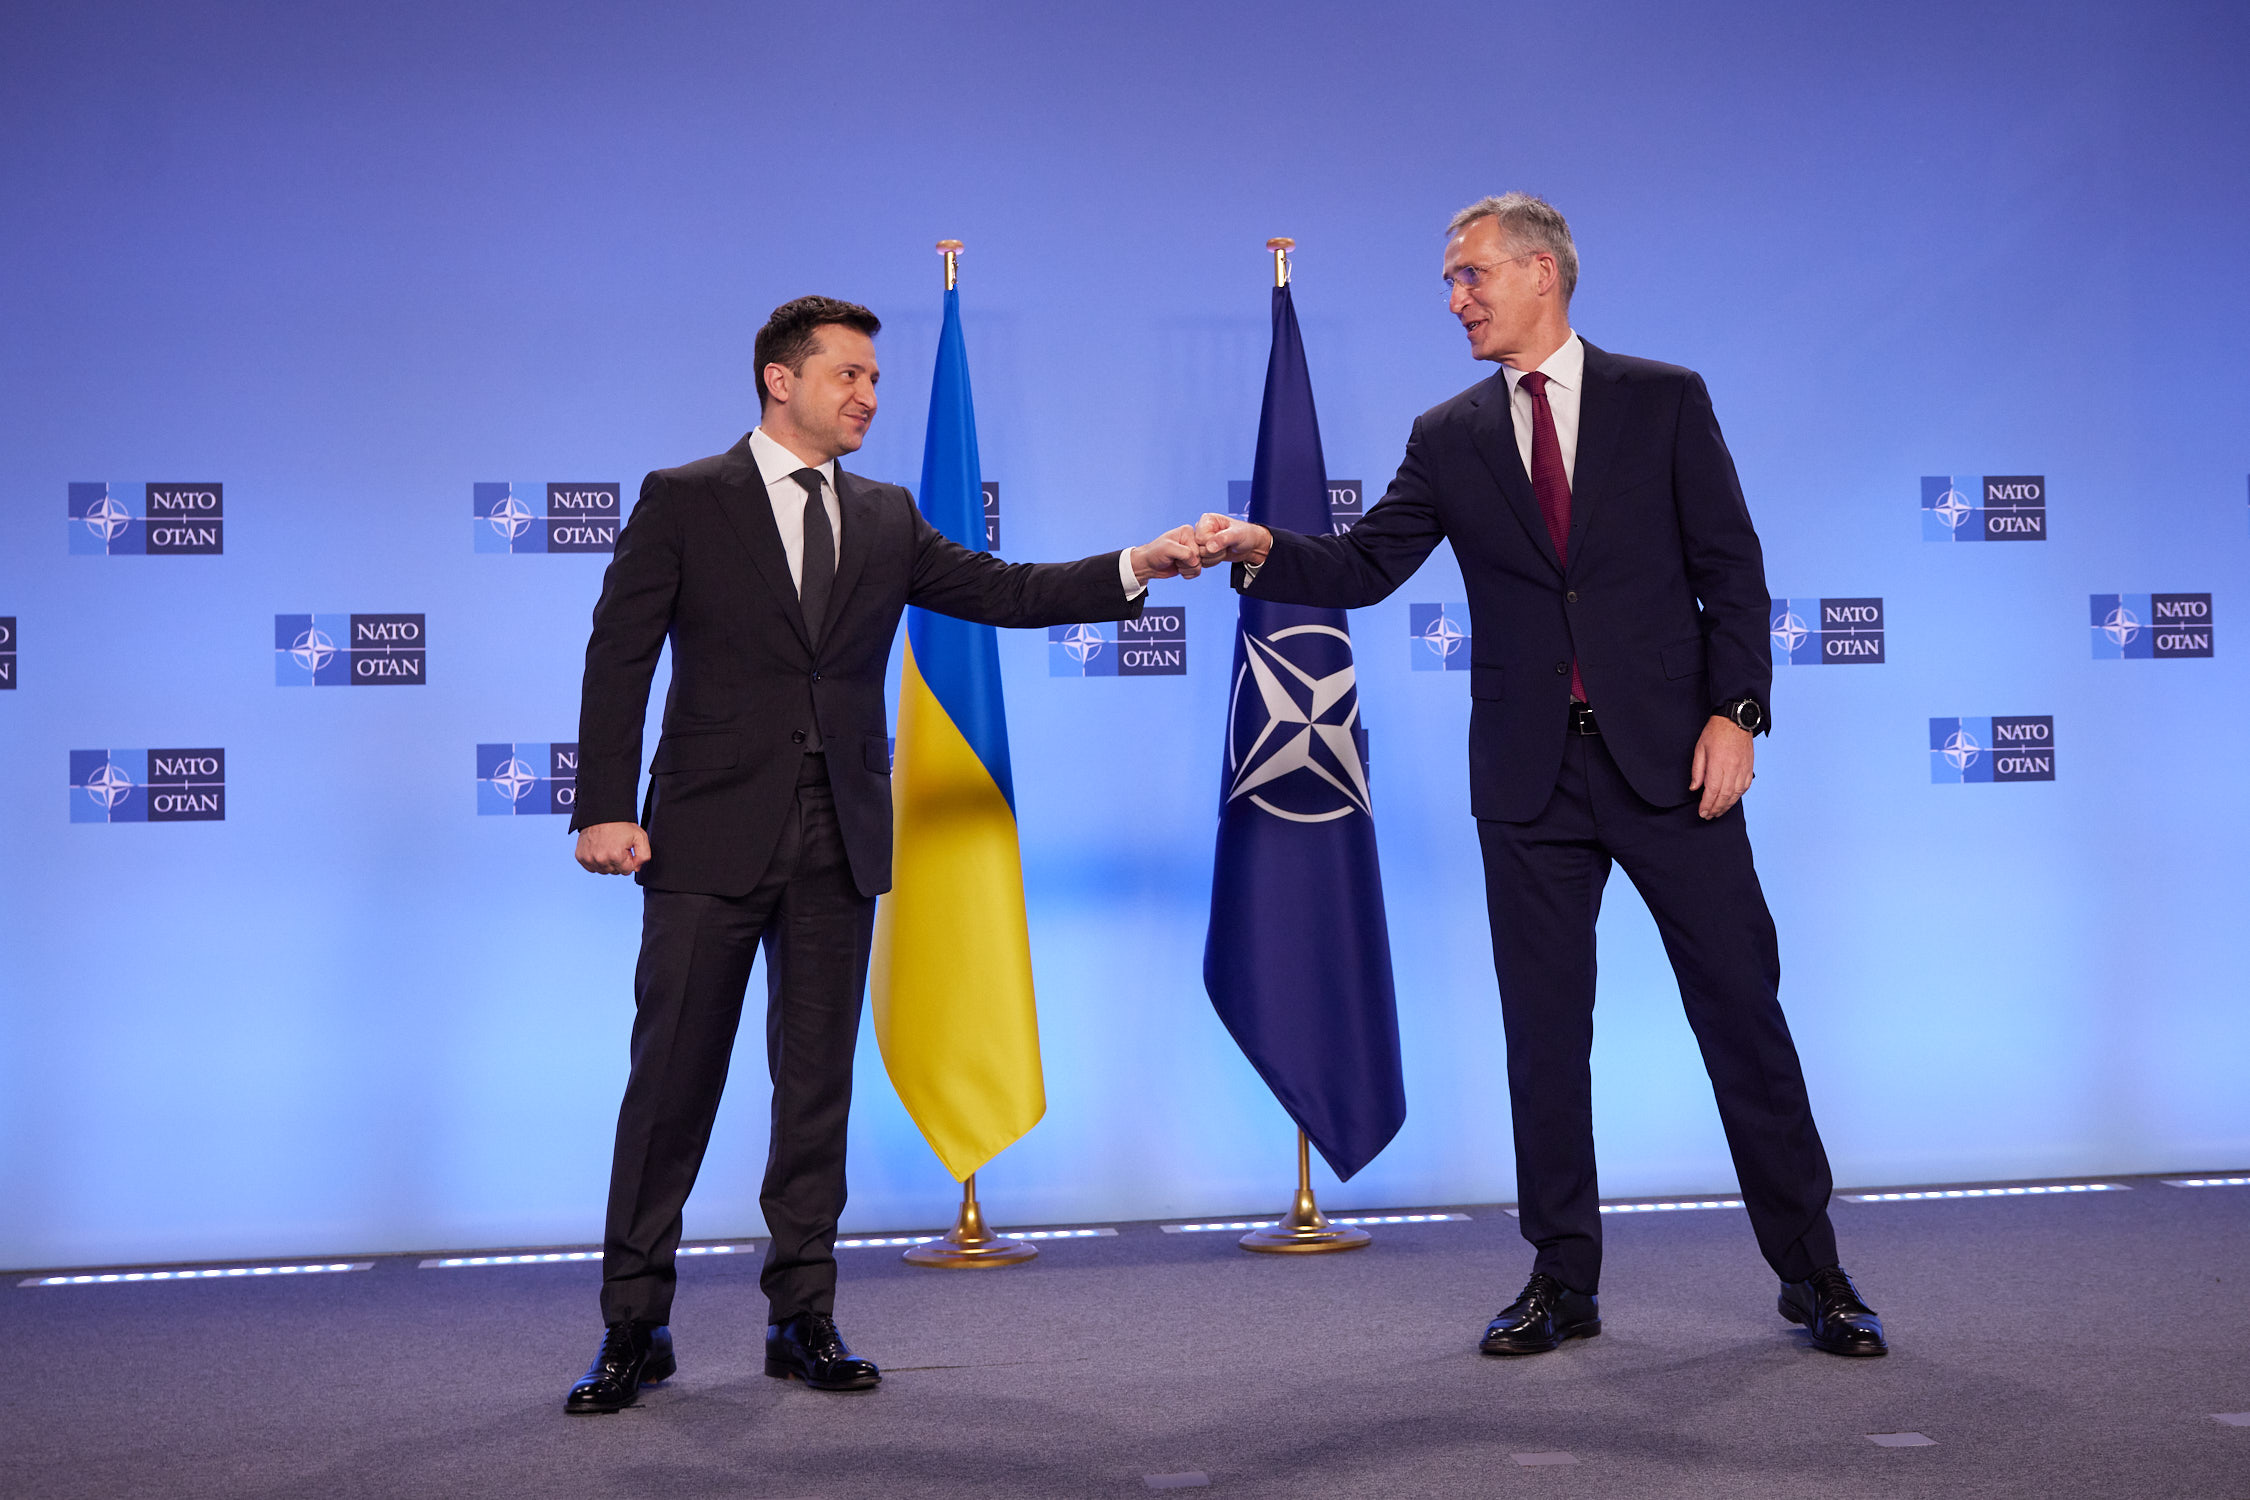 NATO chief Stoltenberg says Russian military buildup continues unabated, as he meets Zelensky in Brussels